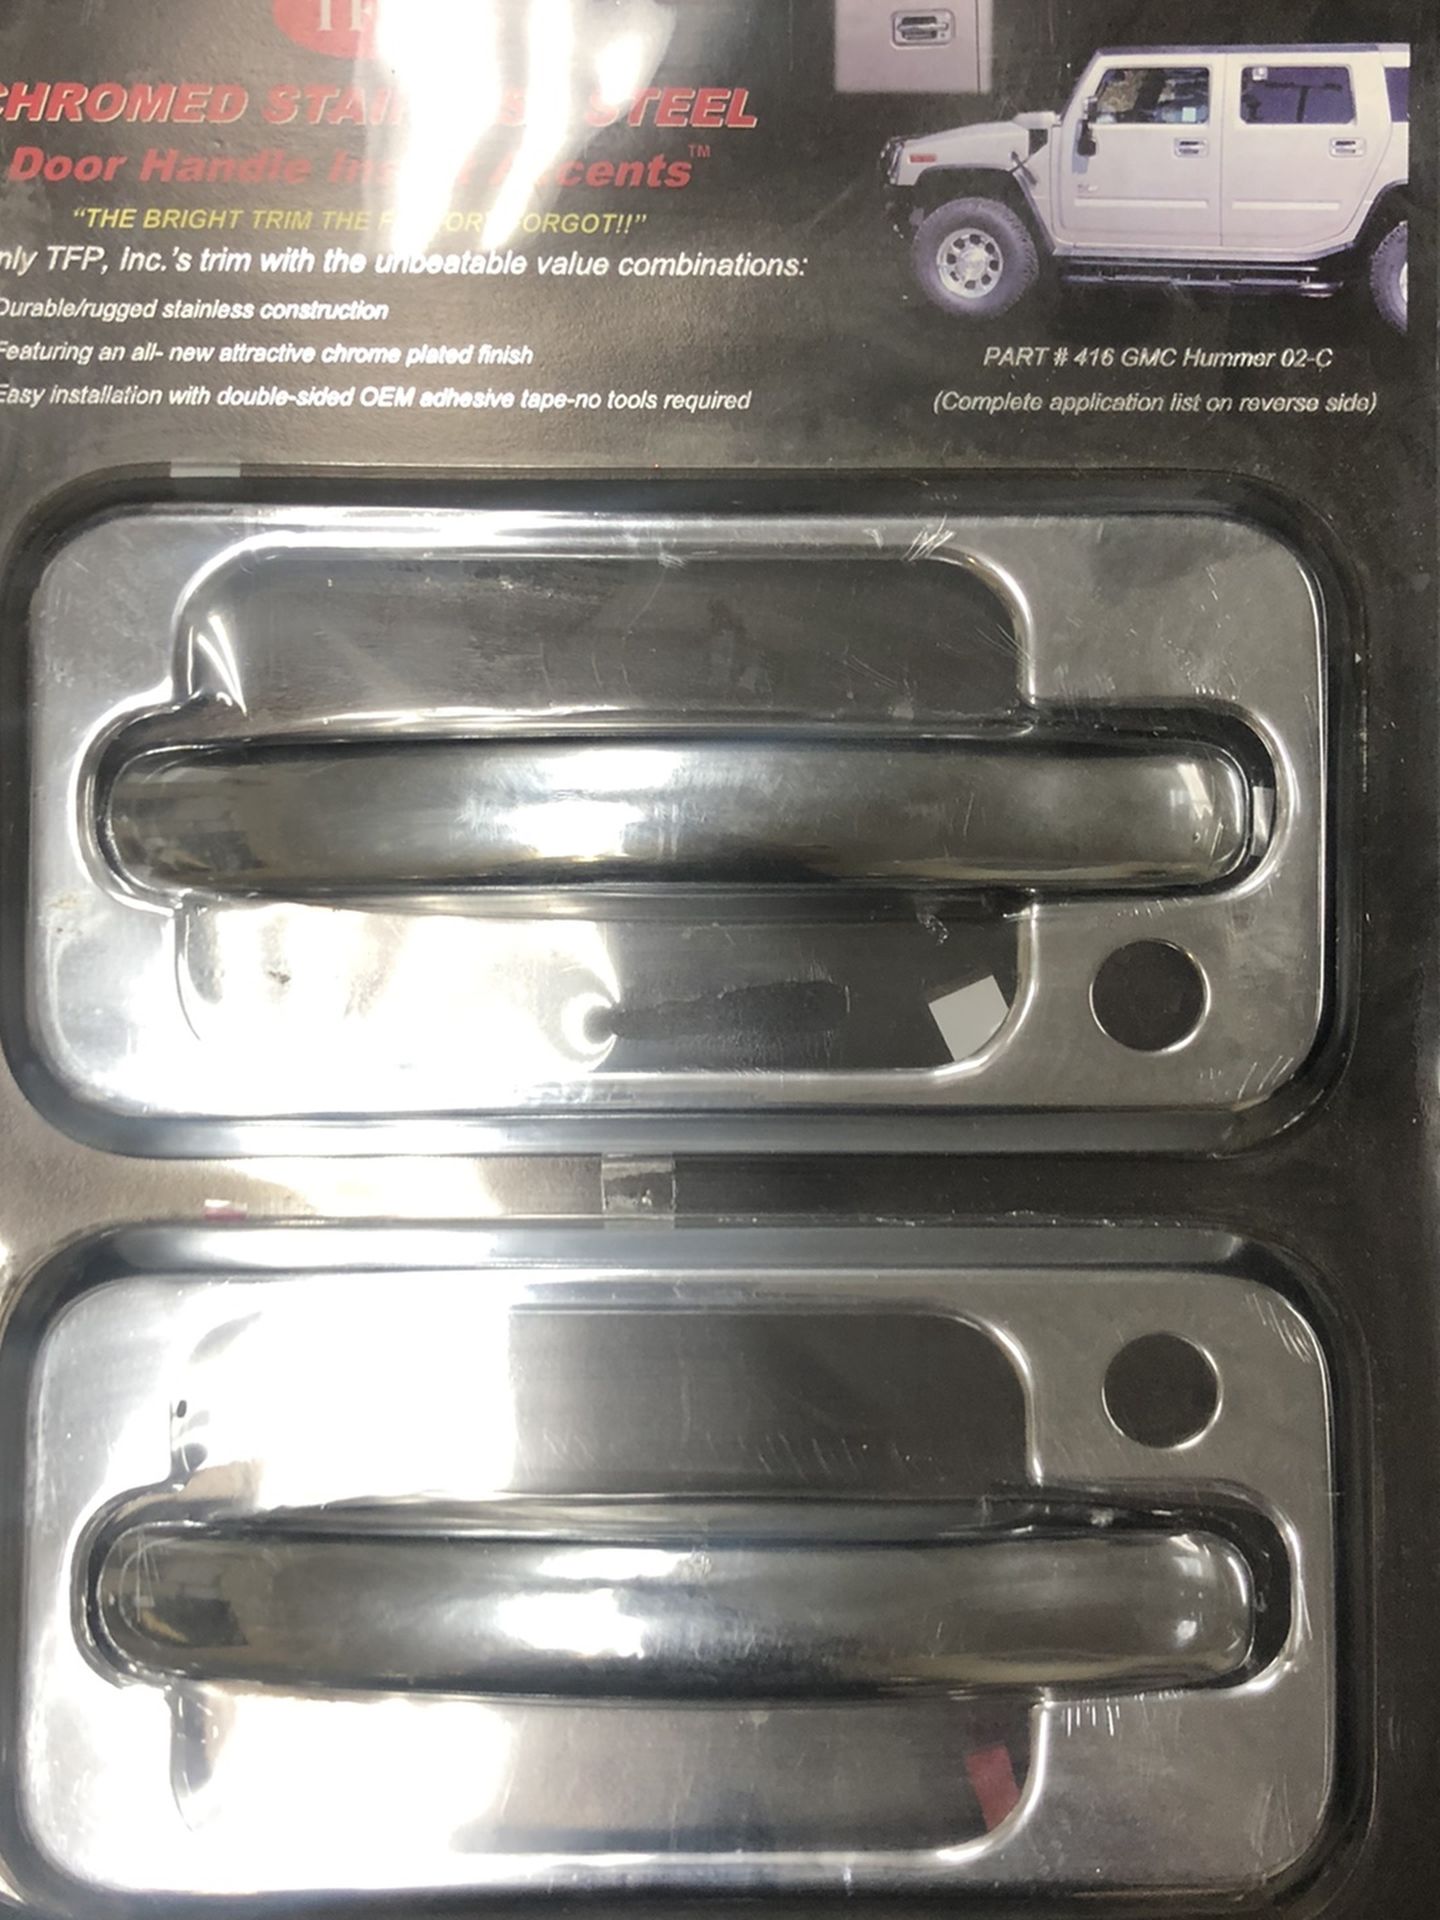 Hummer H2 Chrome Stainless Steel Door Handles Covers